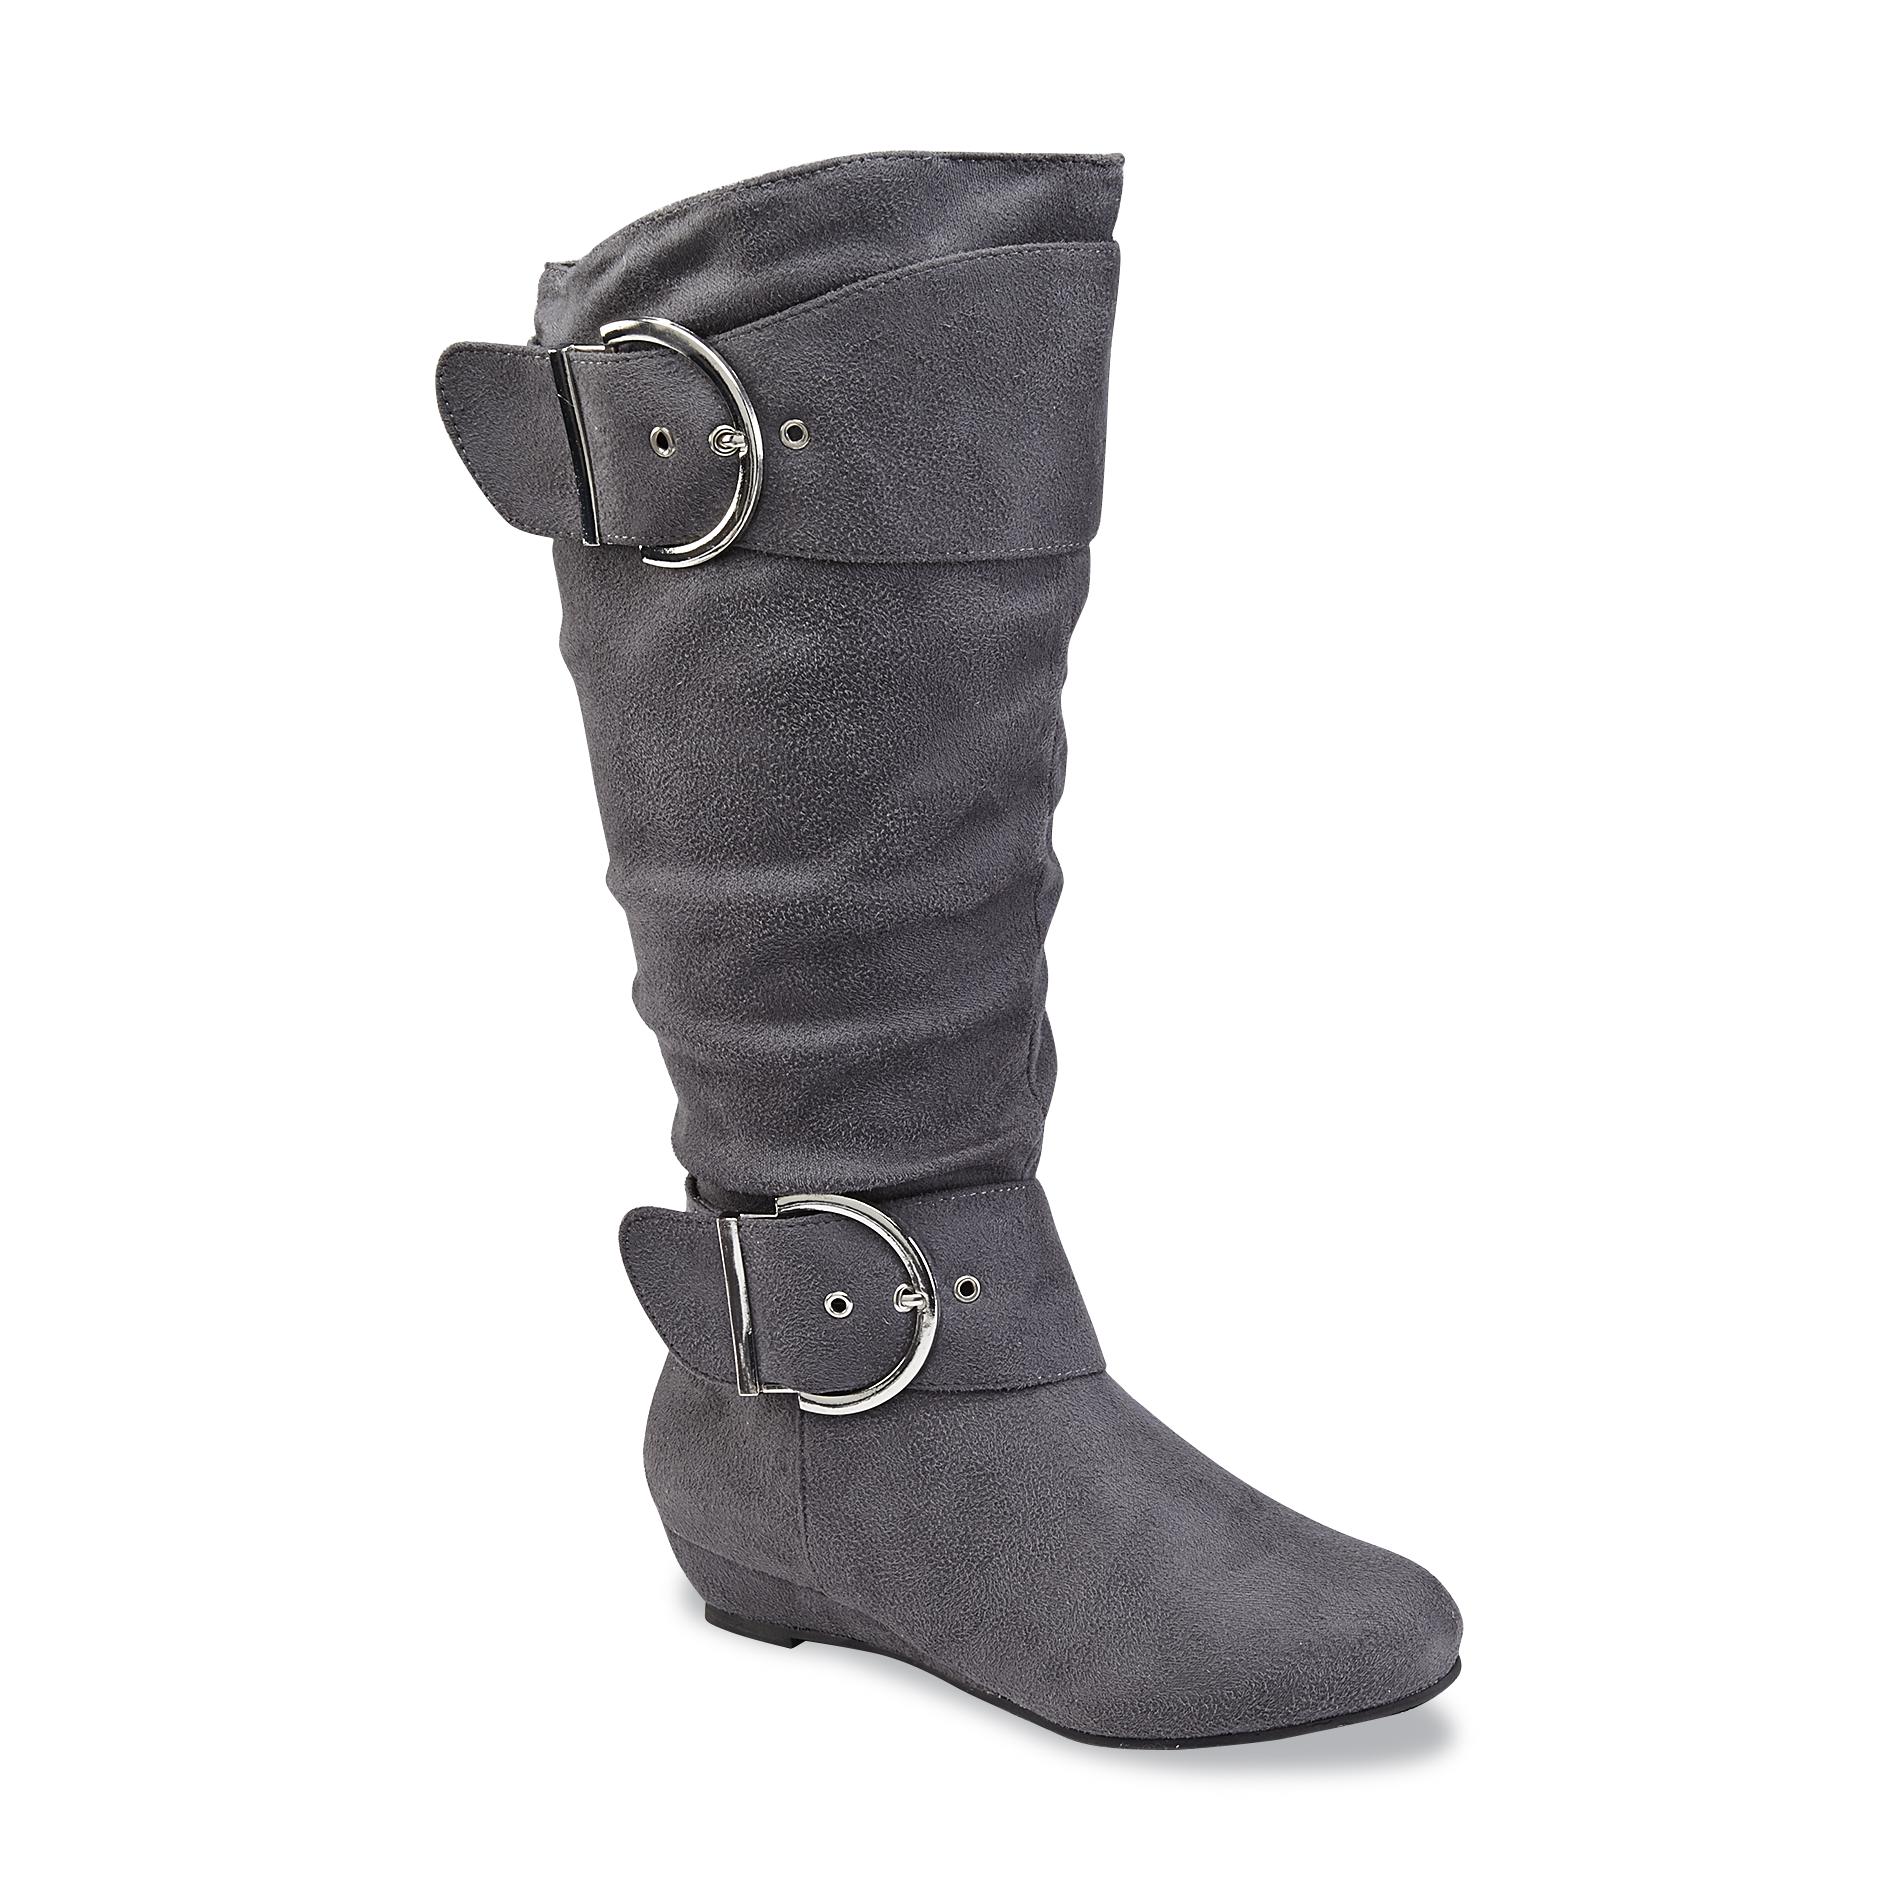 Twisted Women's Tara Gray Knee-High Wedge Boot - Wide Width Available